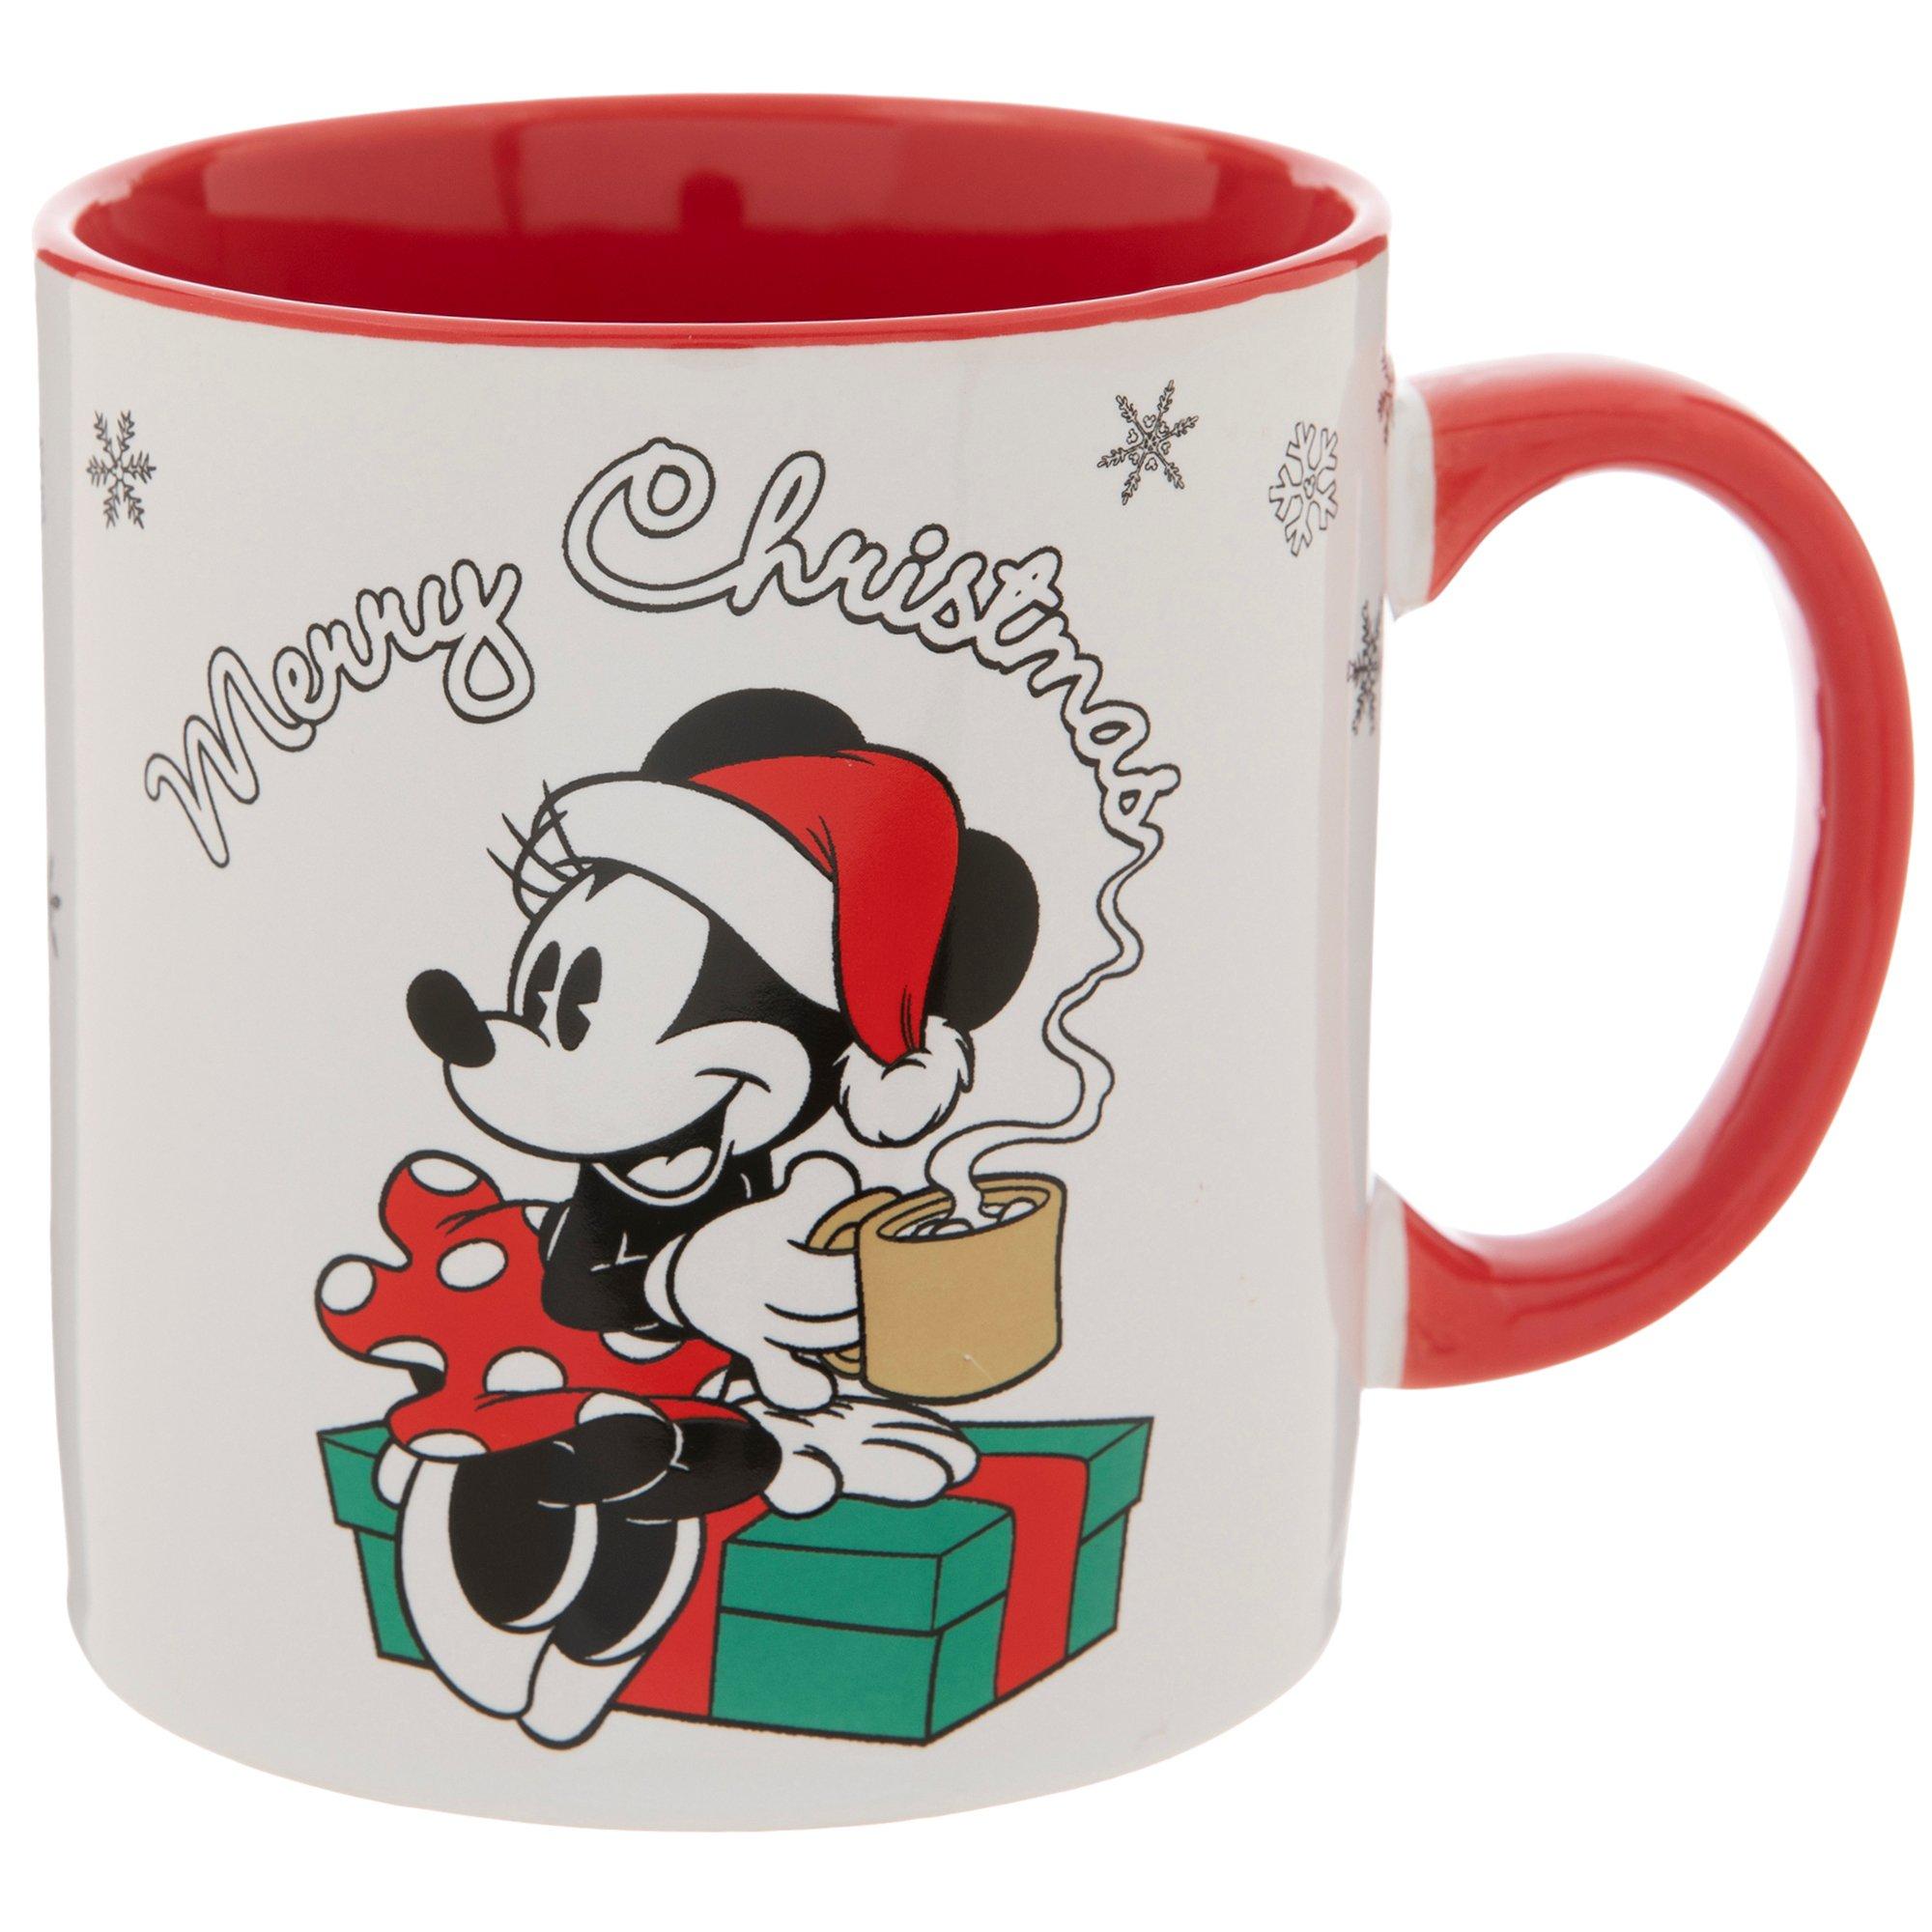 Mickey Mouse Christmas Mug, Christmas Gift for Kids, Personalized Kid Cup,  Toddler Cup, Minnie Mouse Christmas Hot Cocoa Cup, Disney Mug 